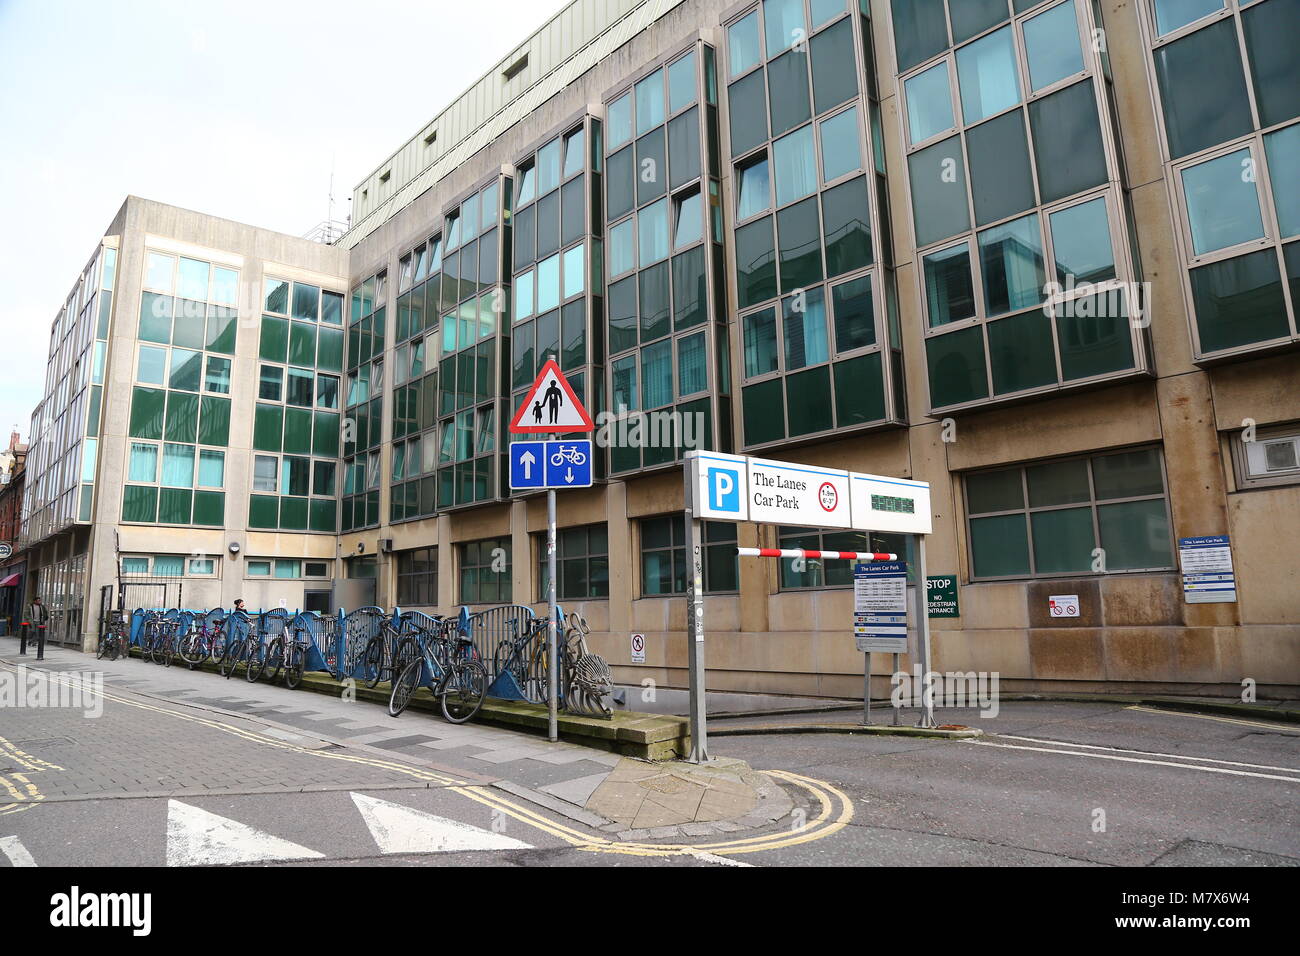 Entrance to the Lanes underground car park in Brighton. March 13, 2018 Stock Photo